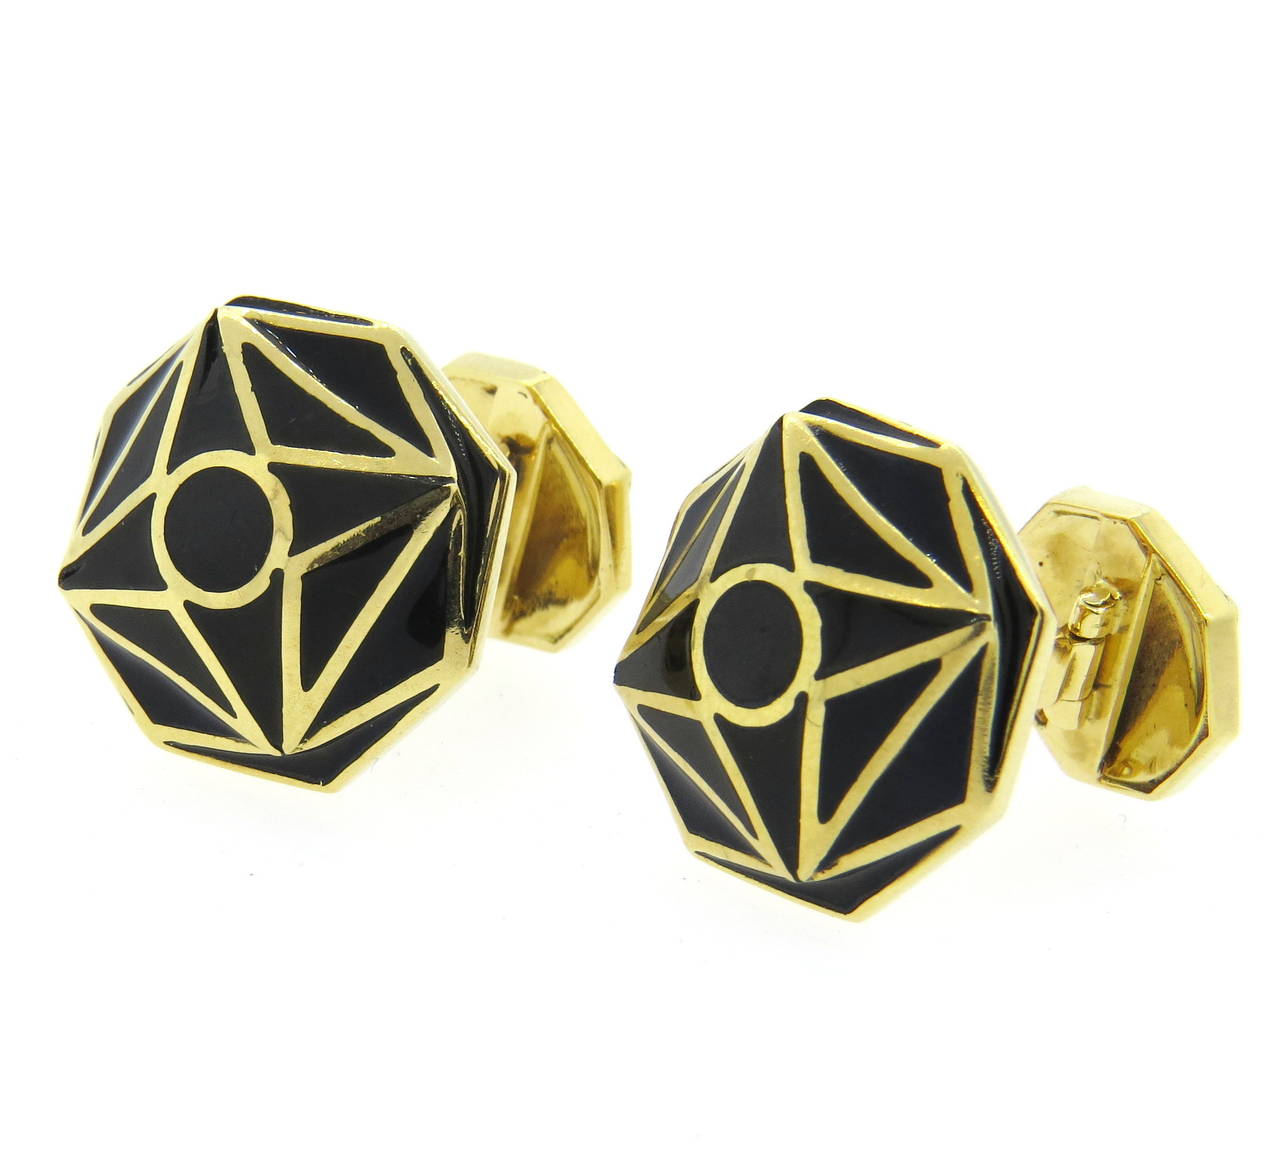 18k gold cufflinks by David Webb, decorated with black enamel ornament. Tops measure 20mm x 20mm, backs measure 14mm x 14mm. Marked Webb and 18k. weight - 24.4gr